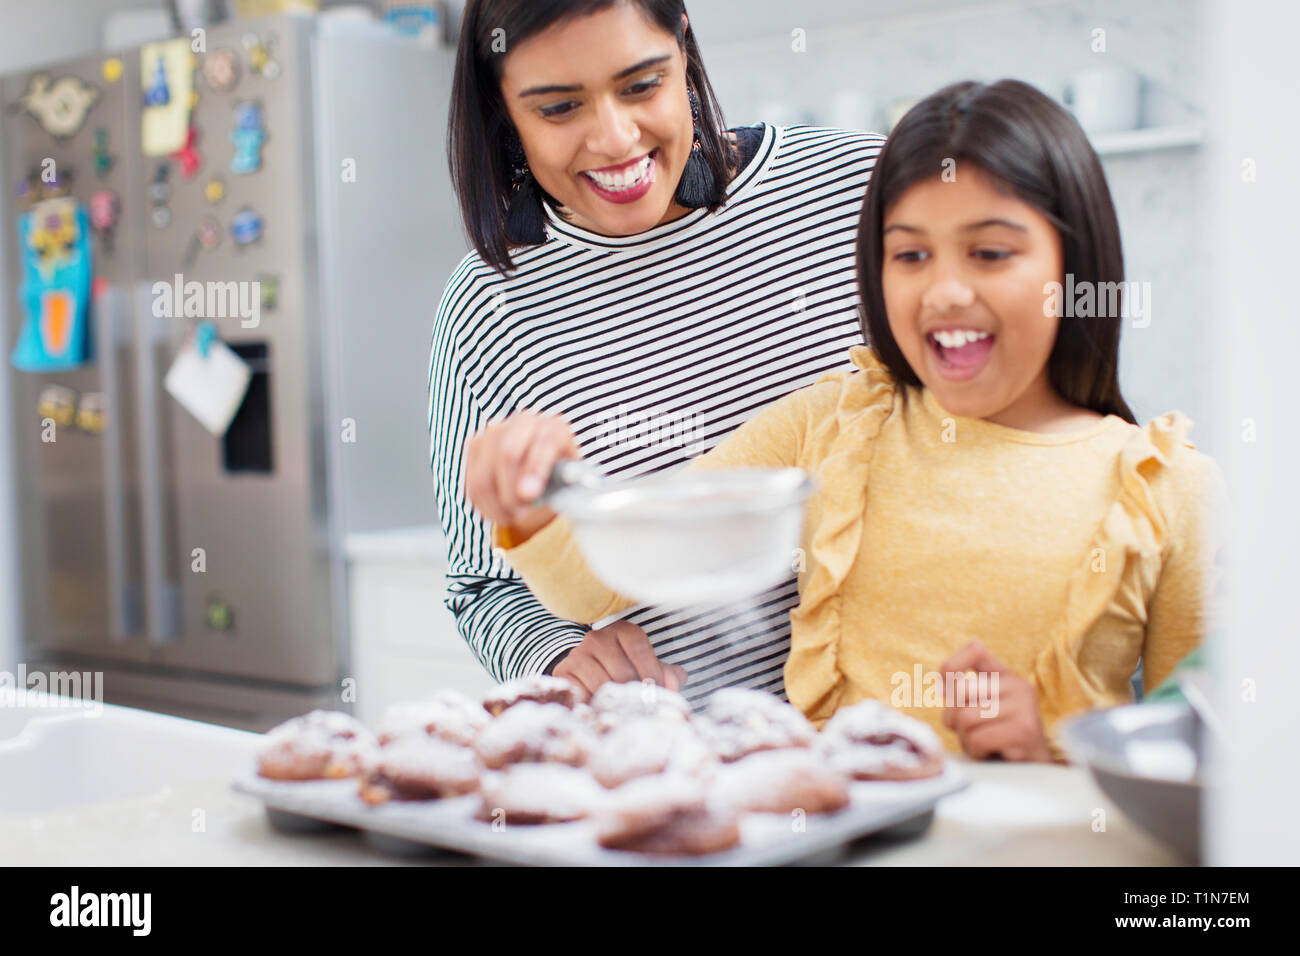 Mother and daughter baking muffins in kitchen Stock Photo